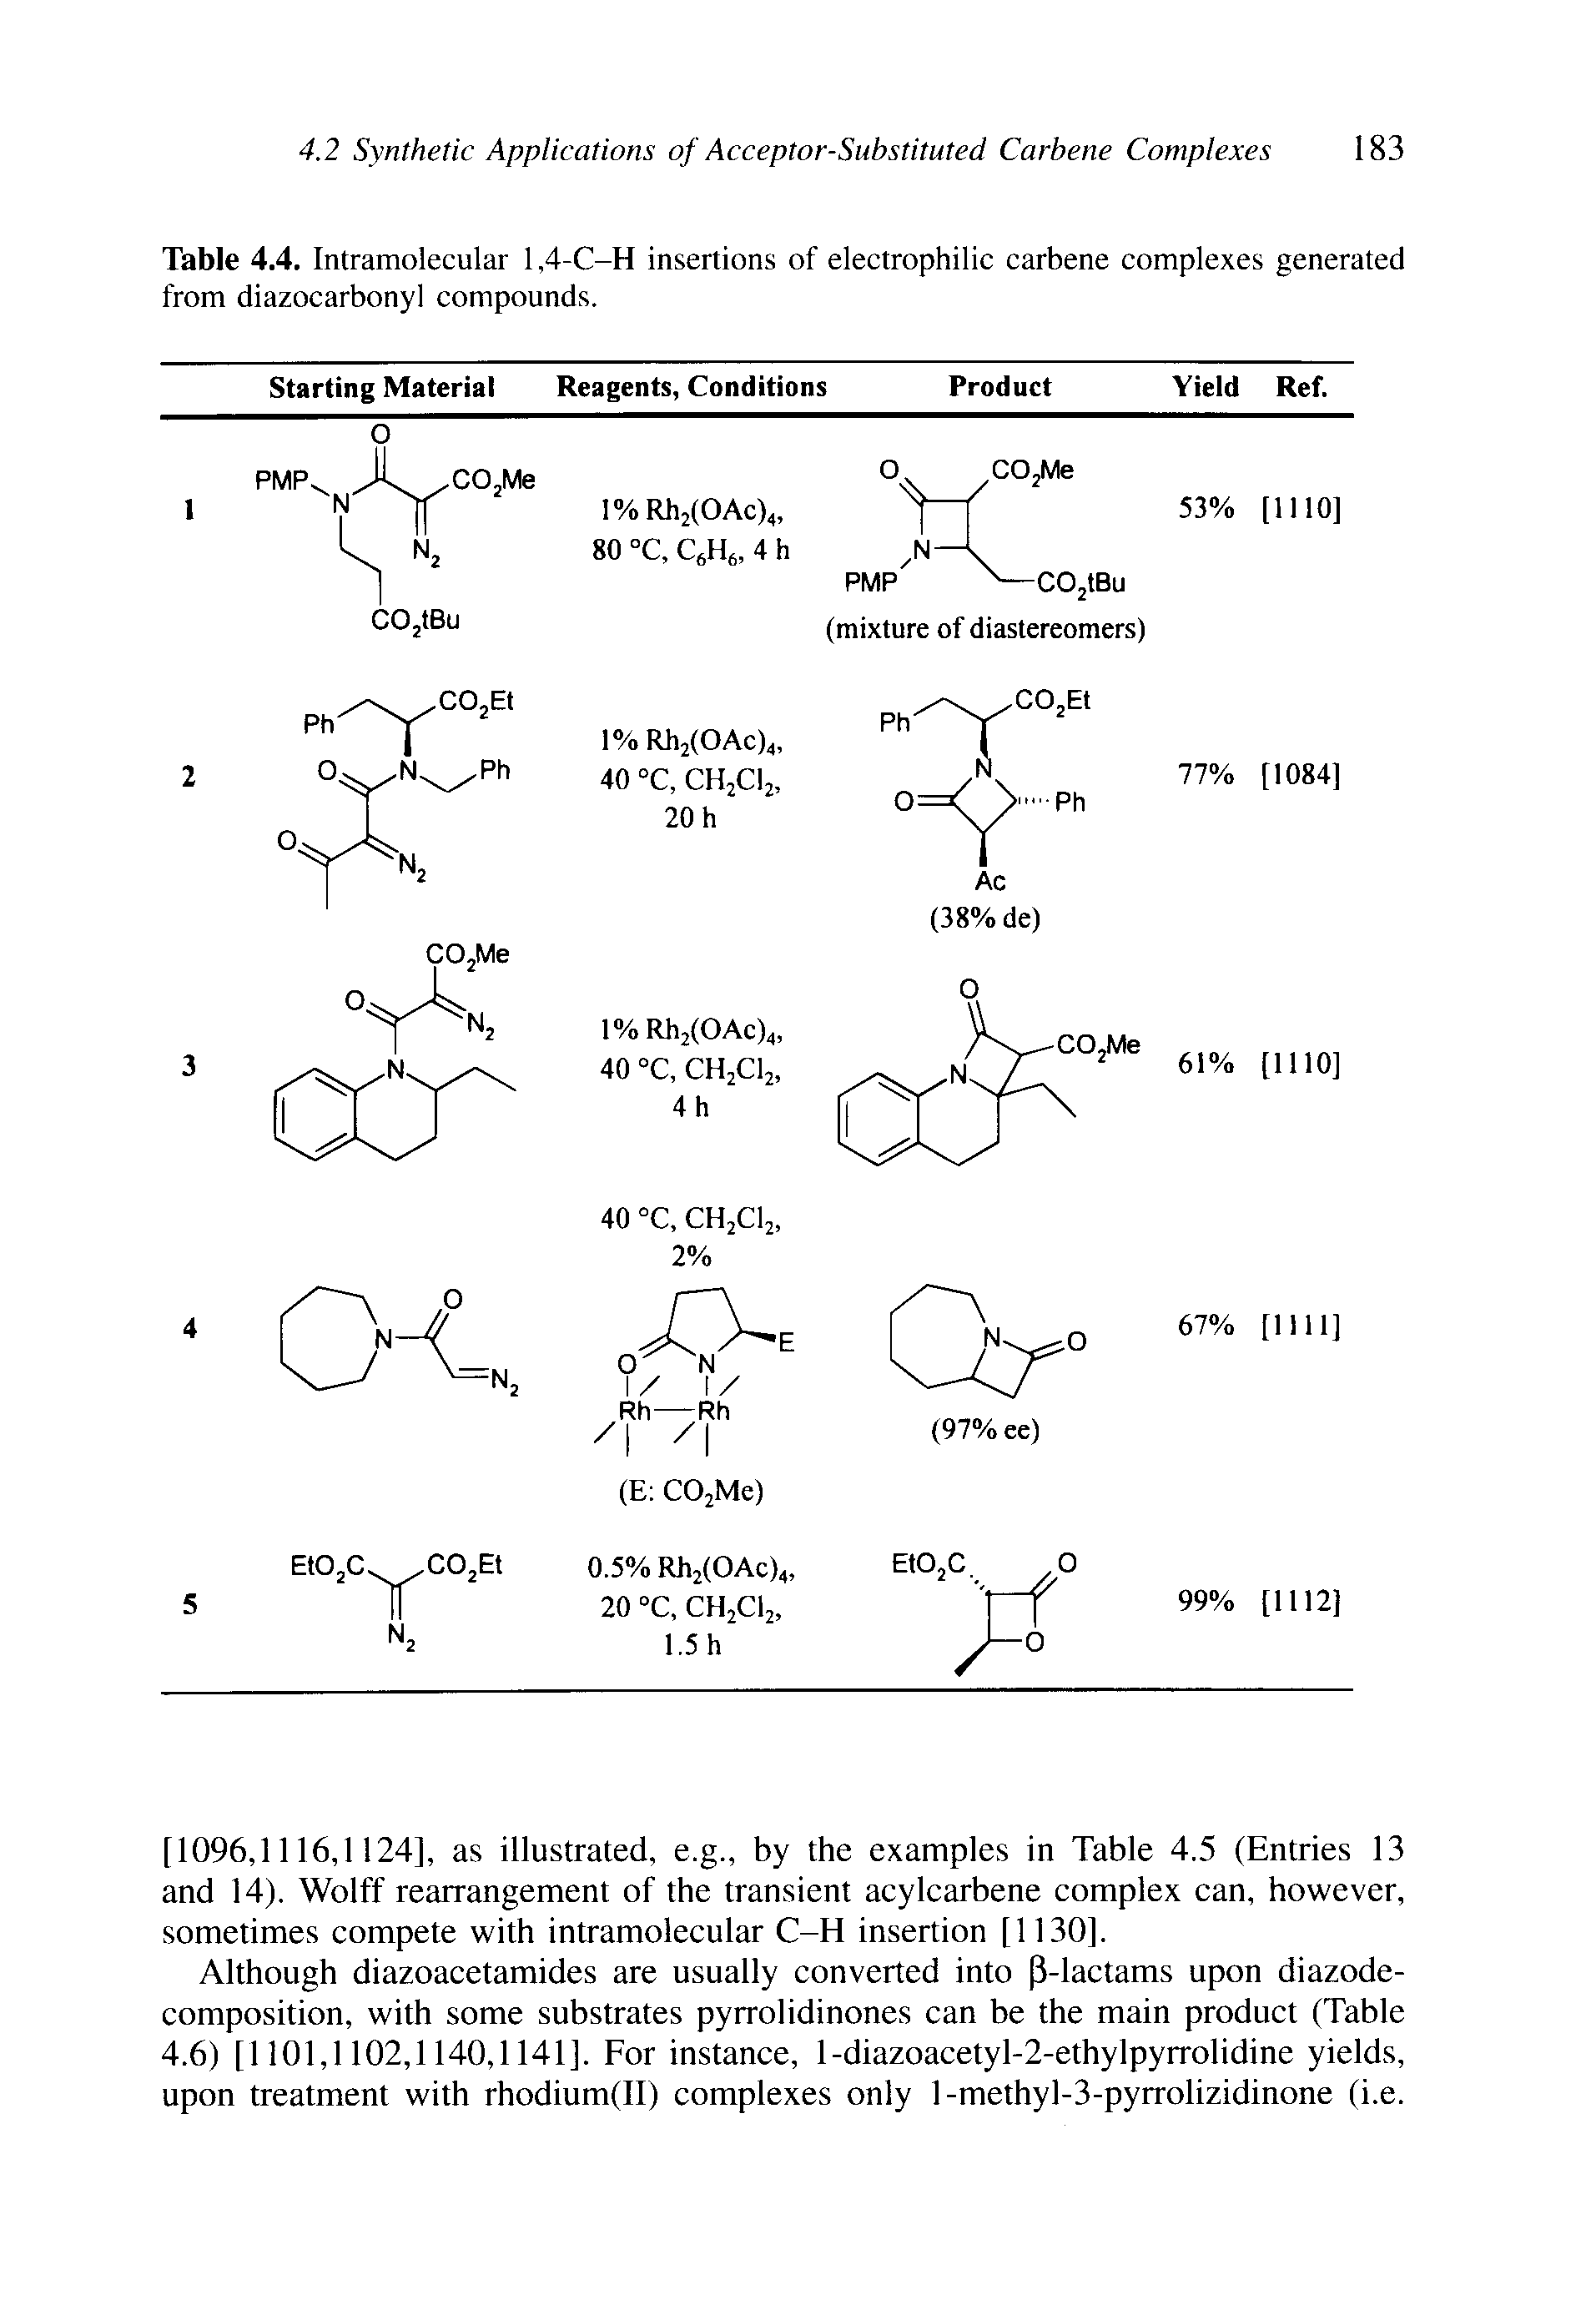 Table 4.4. Intramolecular 1,4-C-H insertions of electrophilic carbene complexes generated from diazocarbonyl compounds.